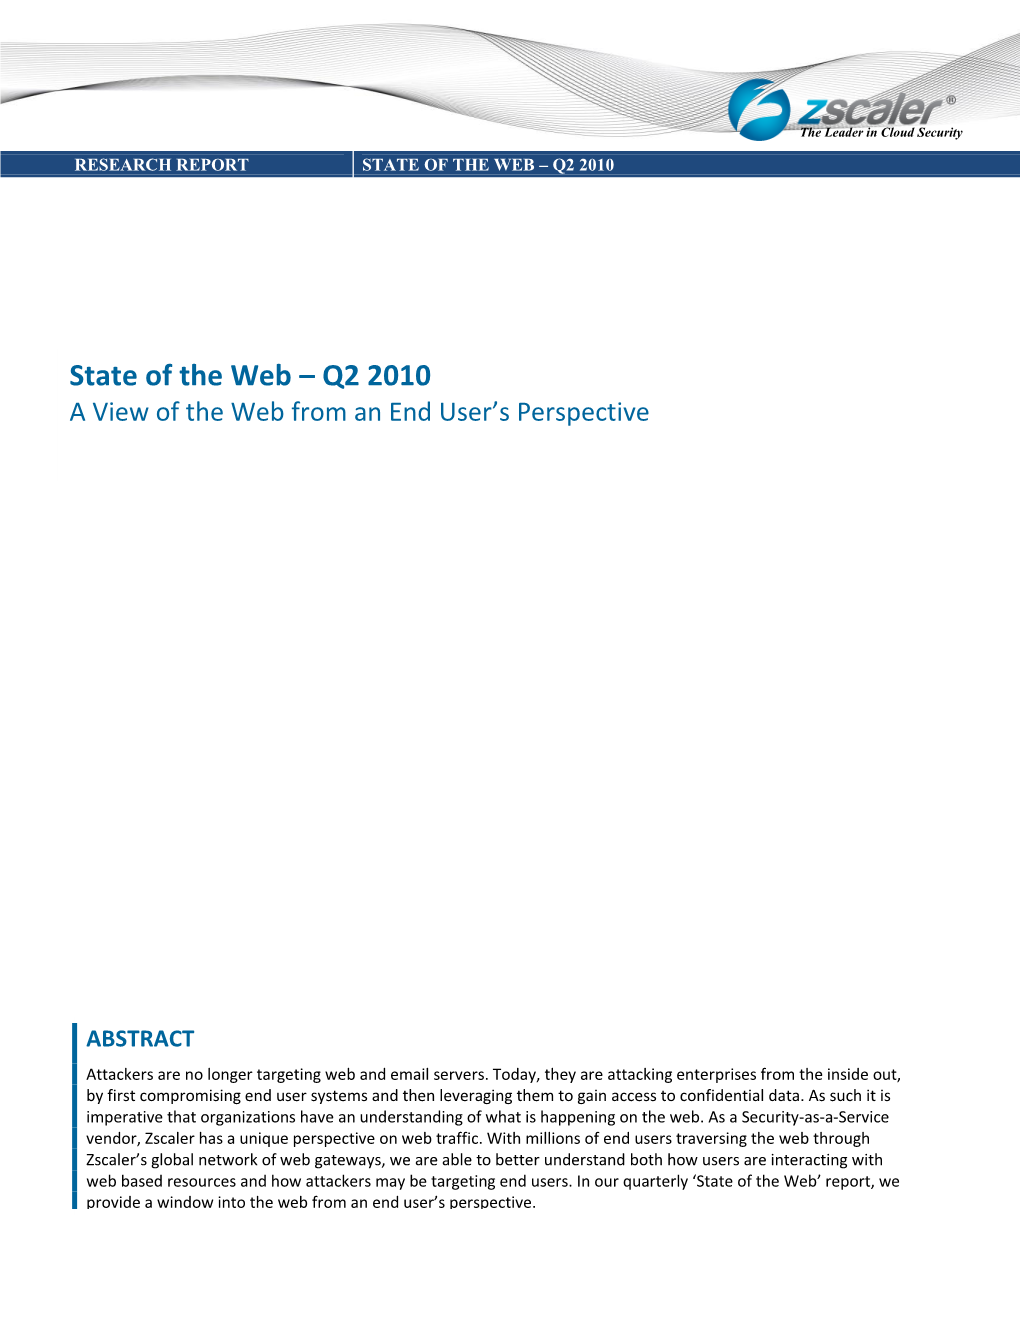 State of the Web – Q2 2010